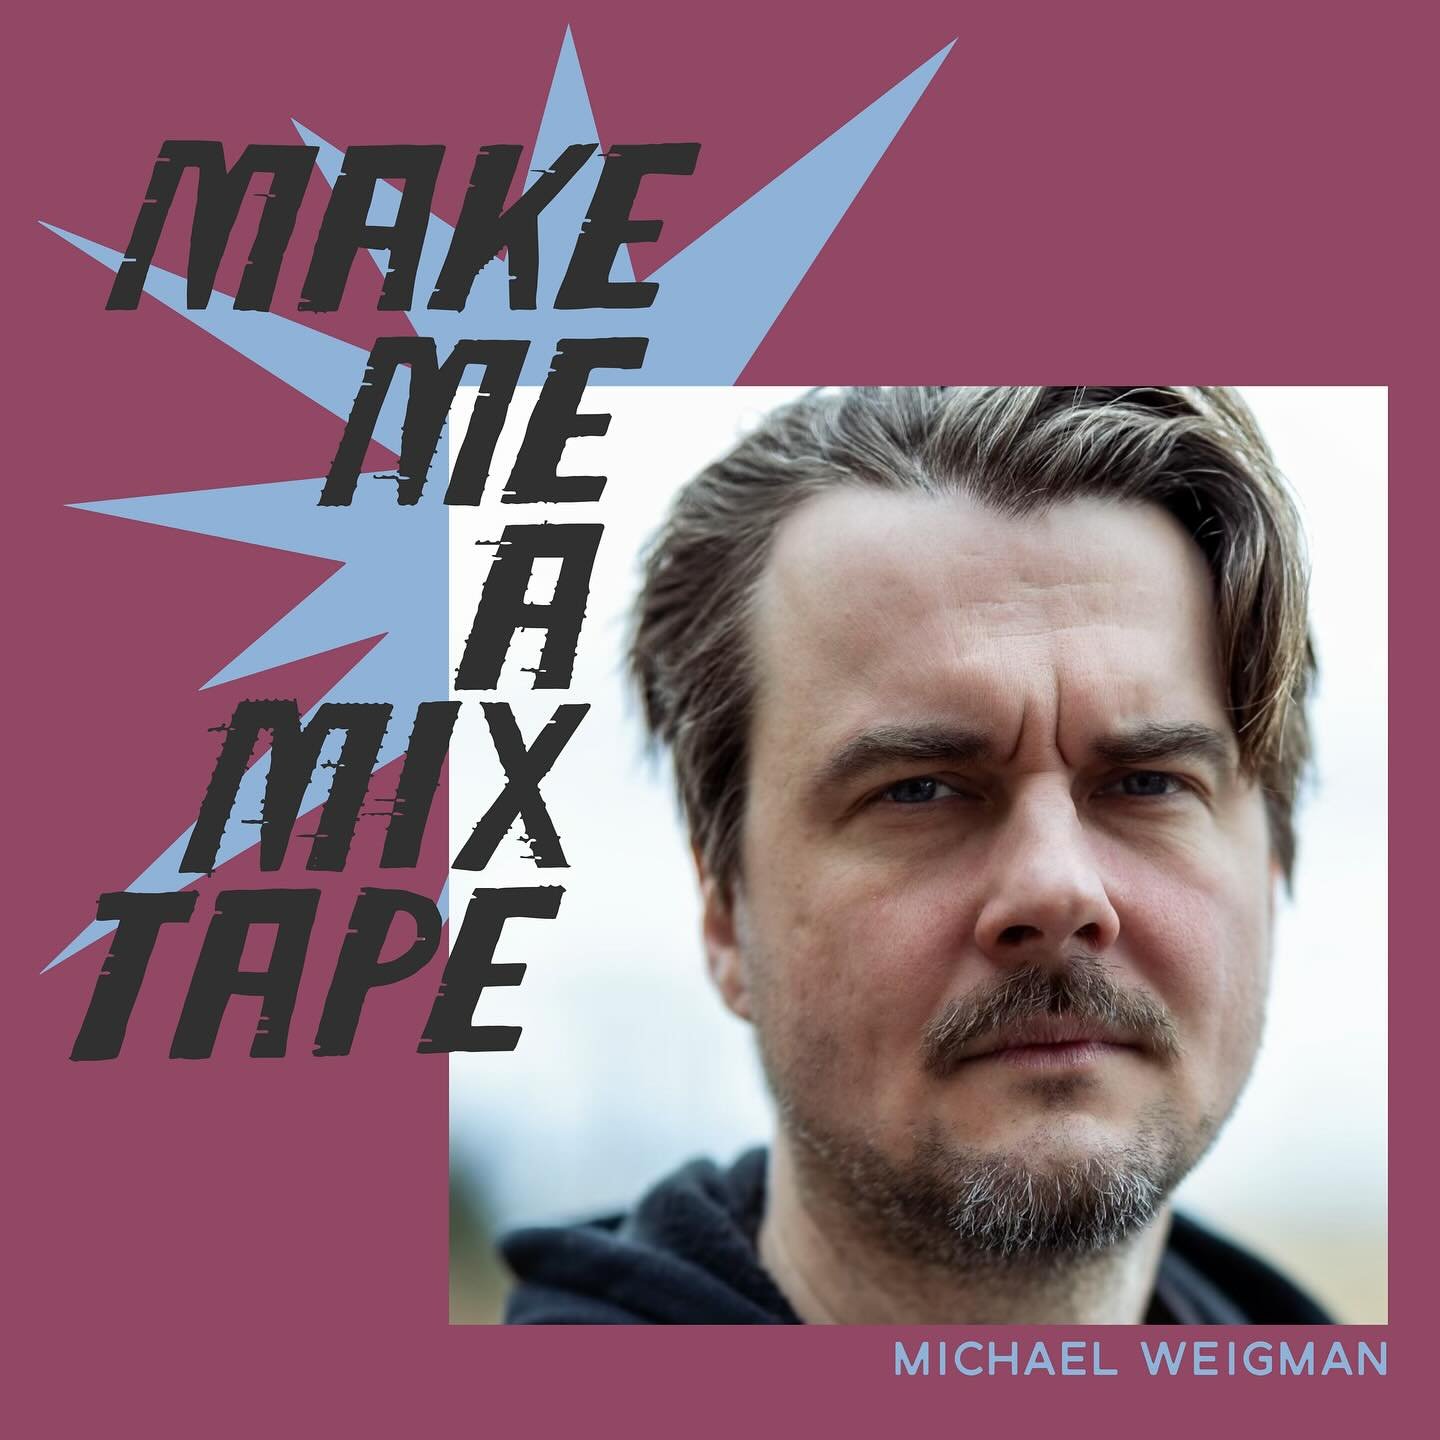 Everyone meet Michael Weigman (@therealskinnymike ), an incredibly talented artist who we are lucky to have participating in our print exchange show &ldquo;Make Me a Mixtape&rdquo;.

Michael is a powerhouse artist creating fine art prints, mixed medi